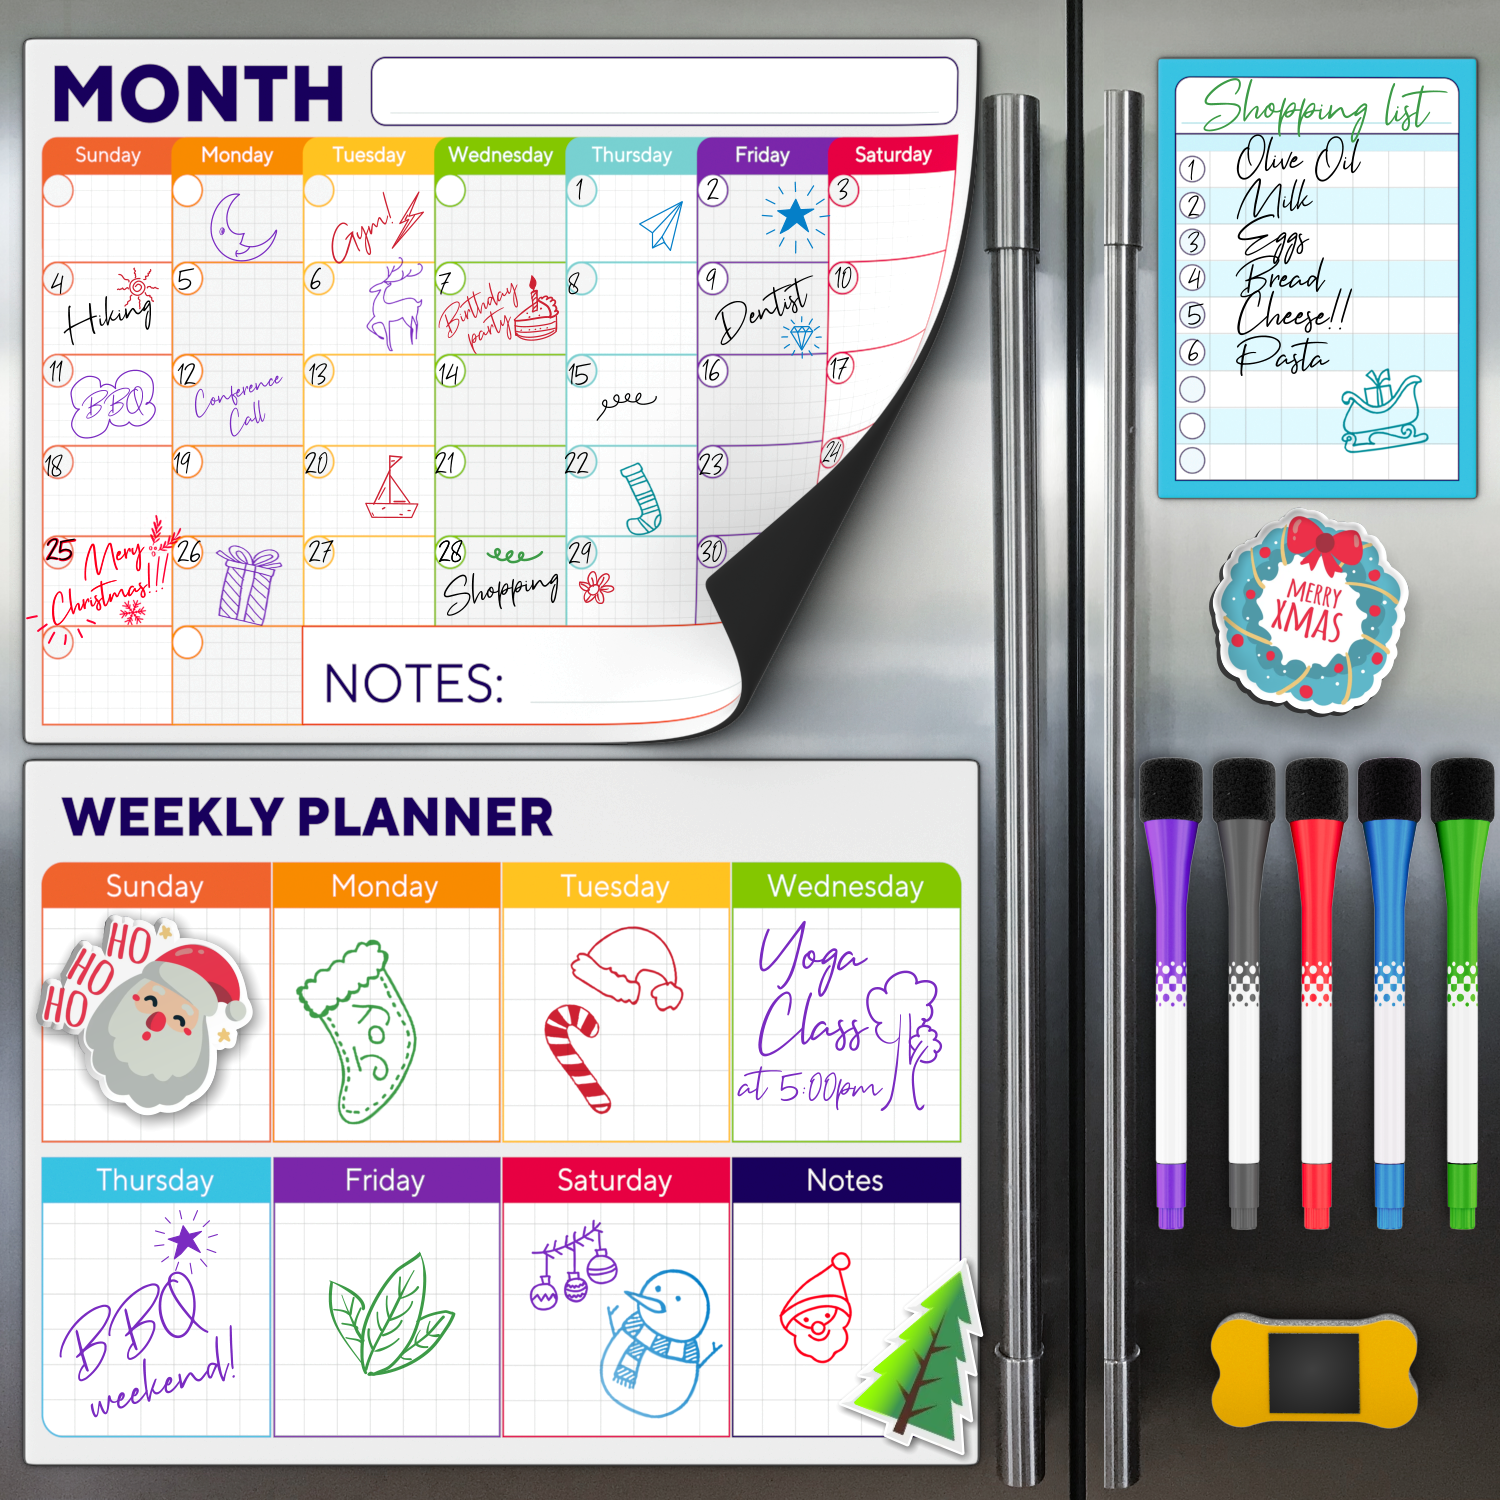 Magnetic Dry Erase Whiteboard Calendar for Fridge Set of 3 - Includes: Monthly, Weekly & Daily Calendar Whiteboard, Grocery List, 5 Markers & Eraser